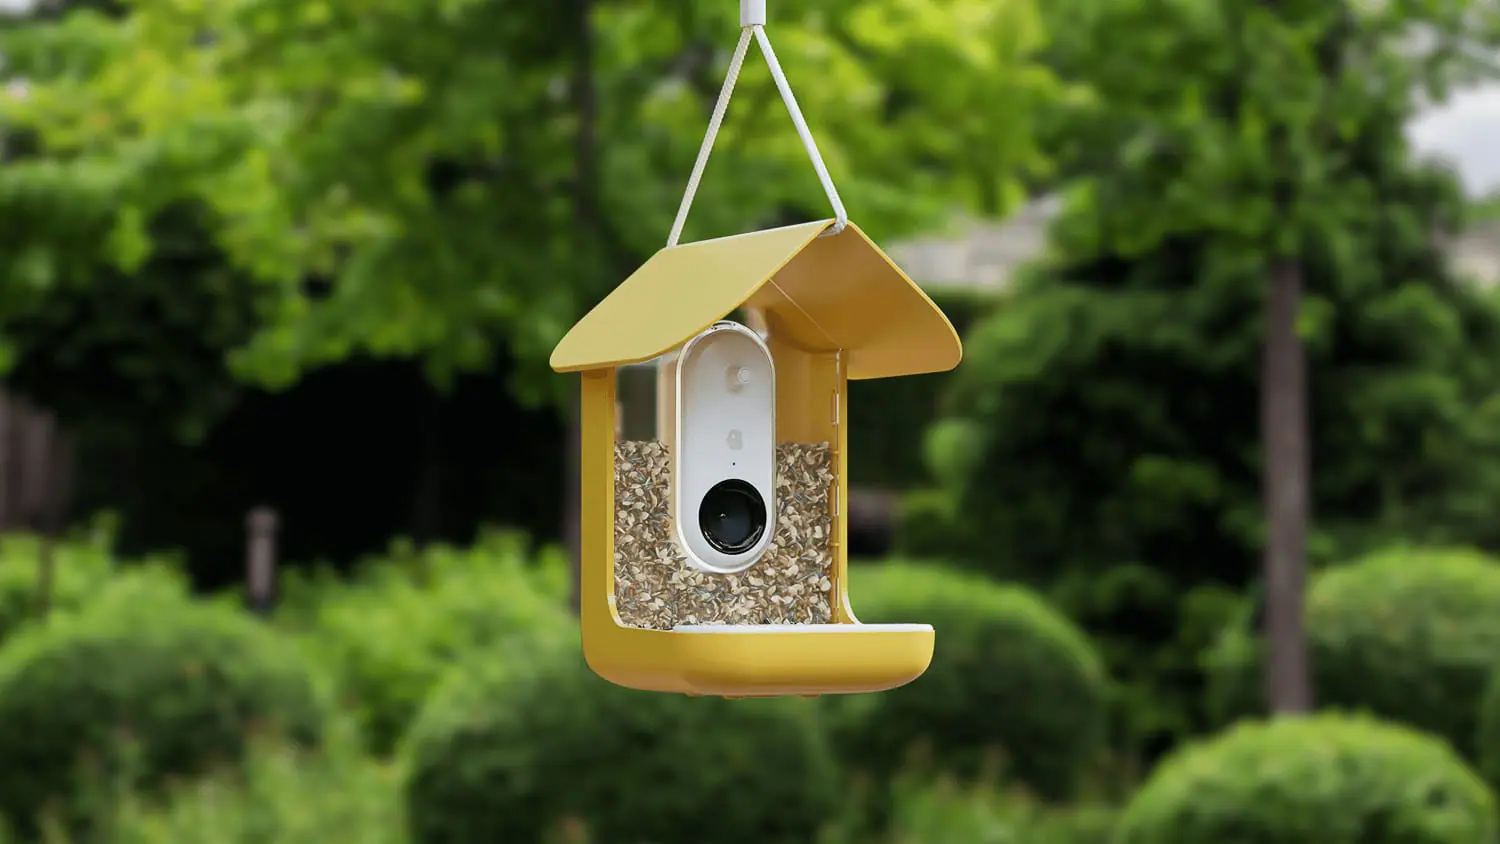 Backyard Birding Goes Extreme With Hi-Tech Feeders and Specialty